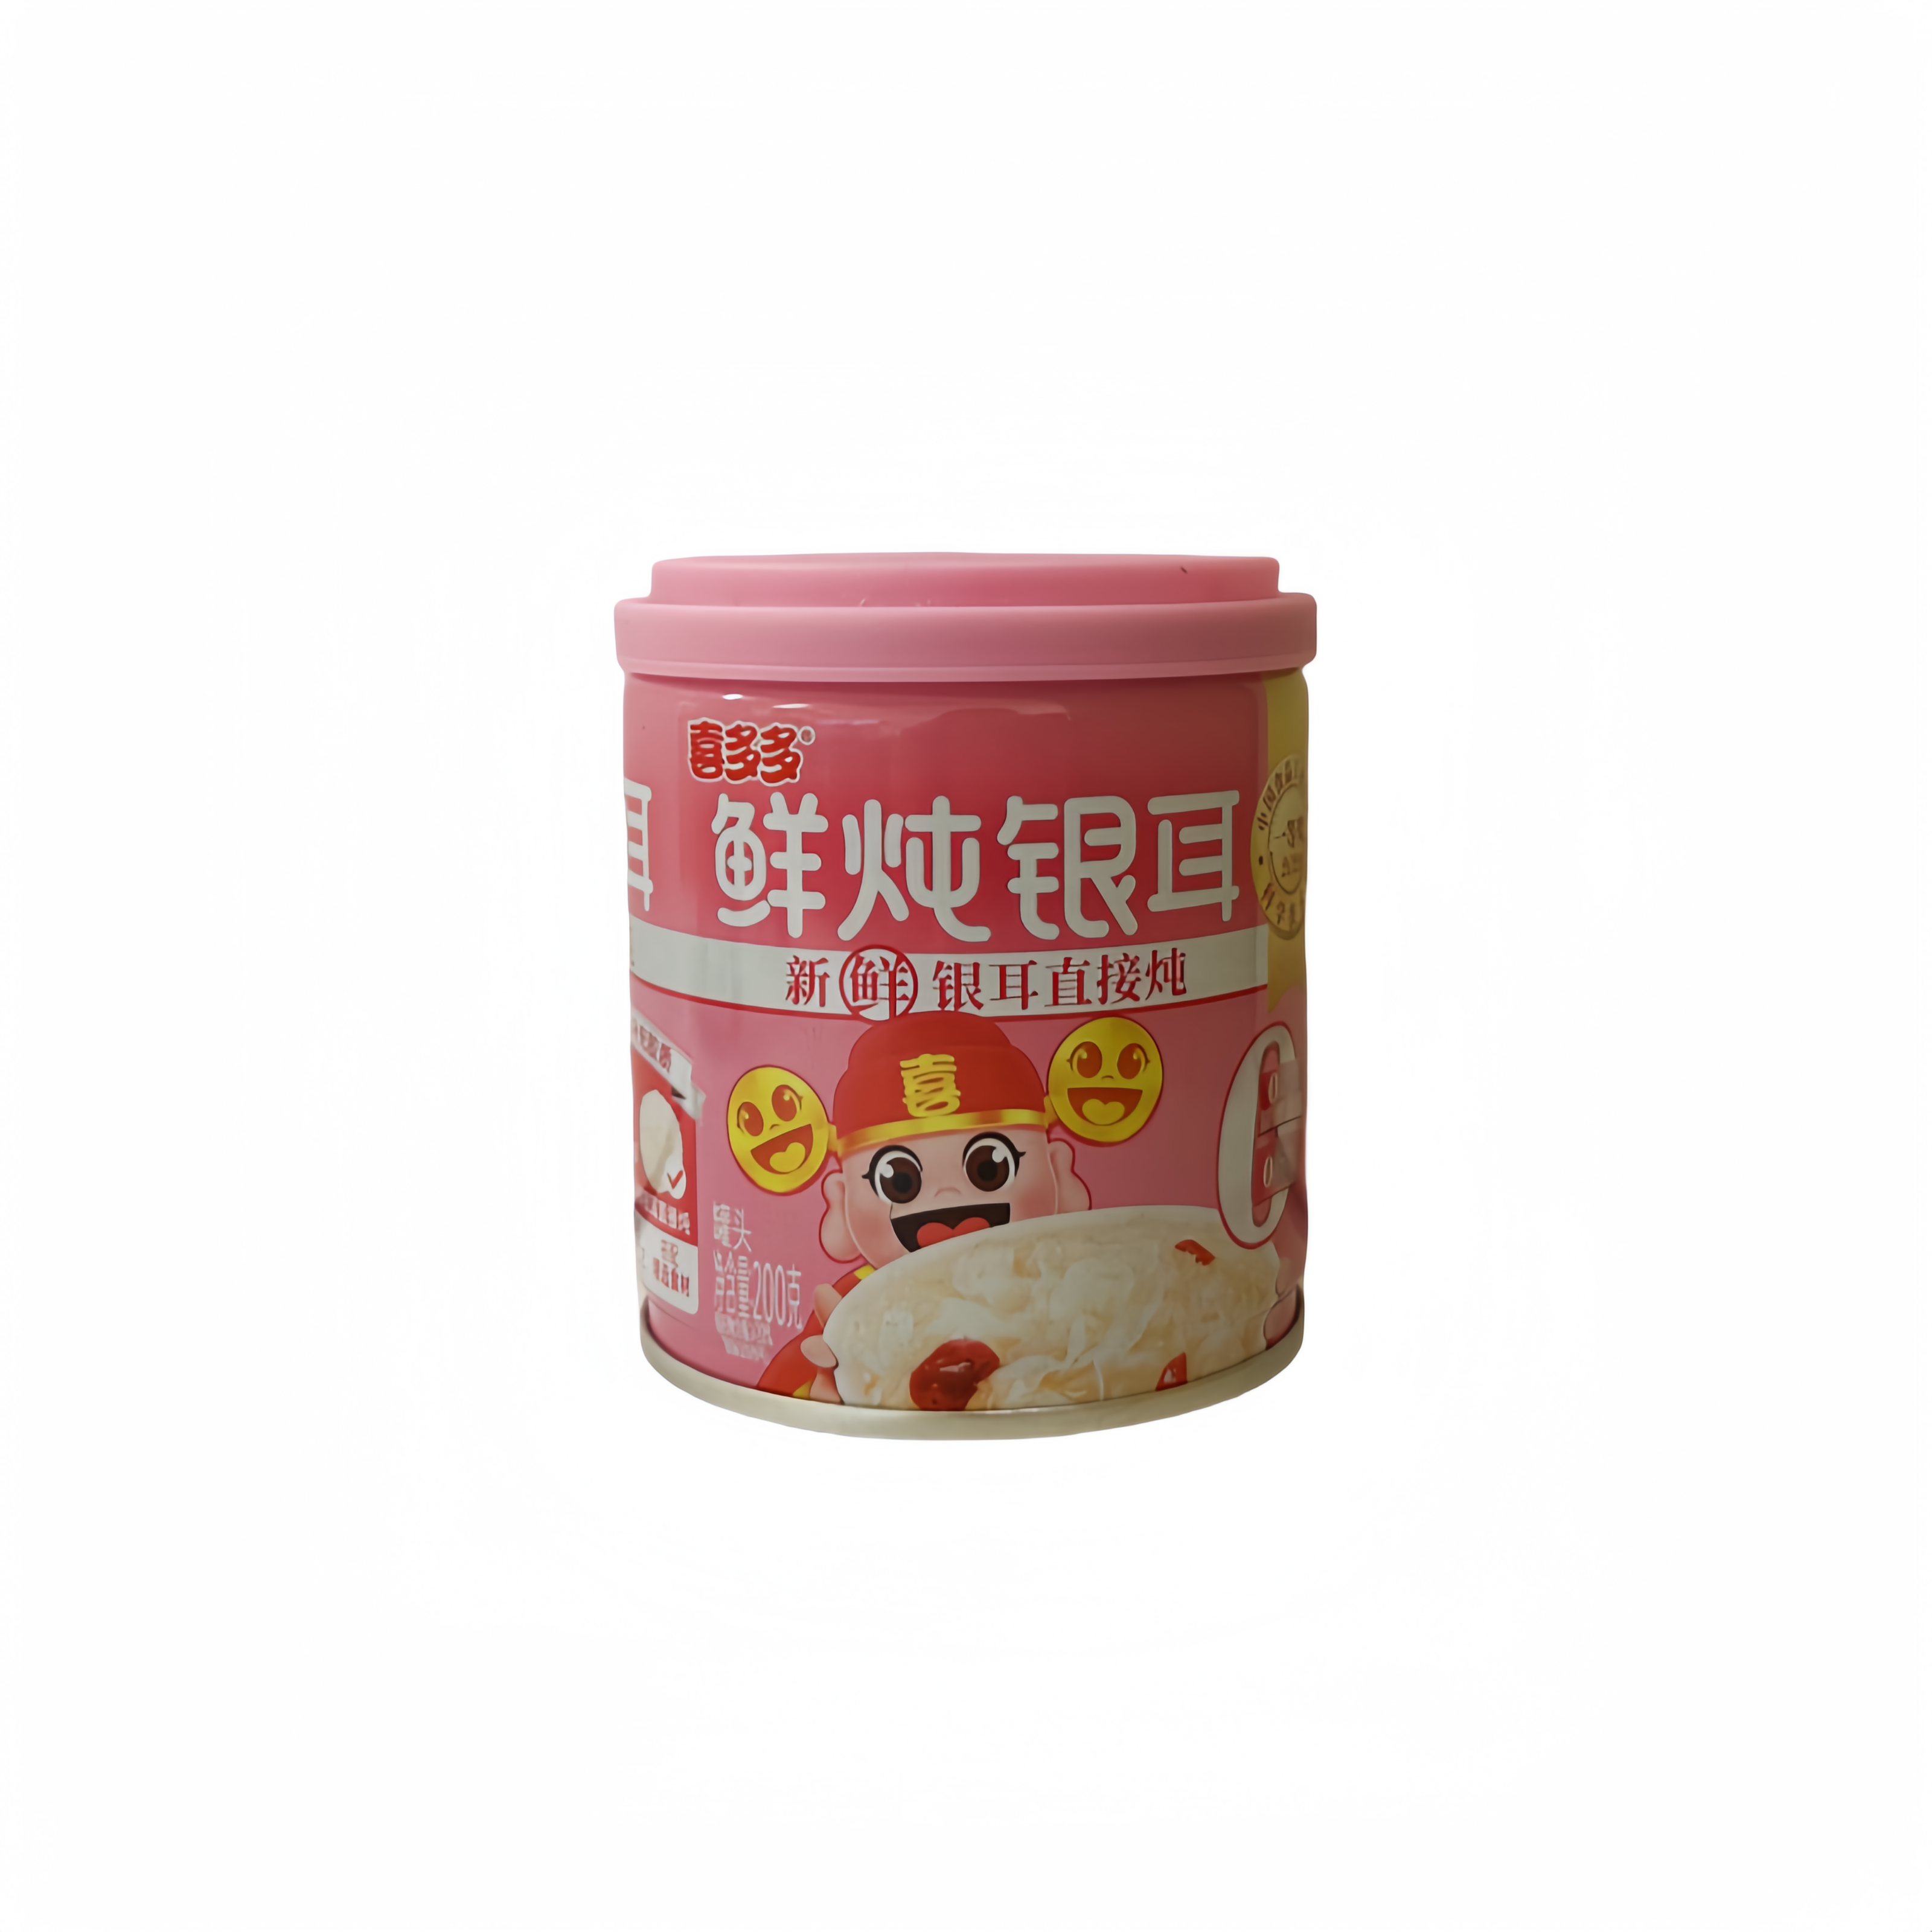 White Fungus and Lily Bulb Dessert 200g Xi Duo Duo China